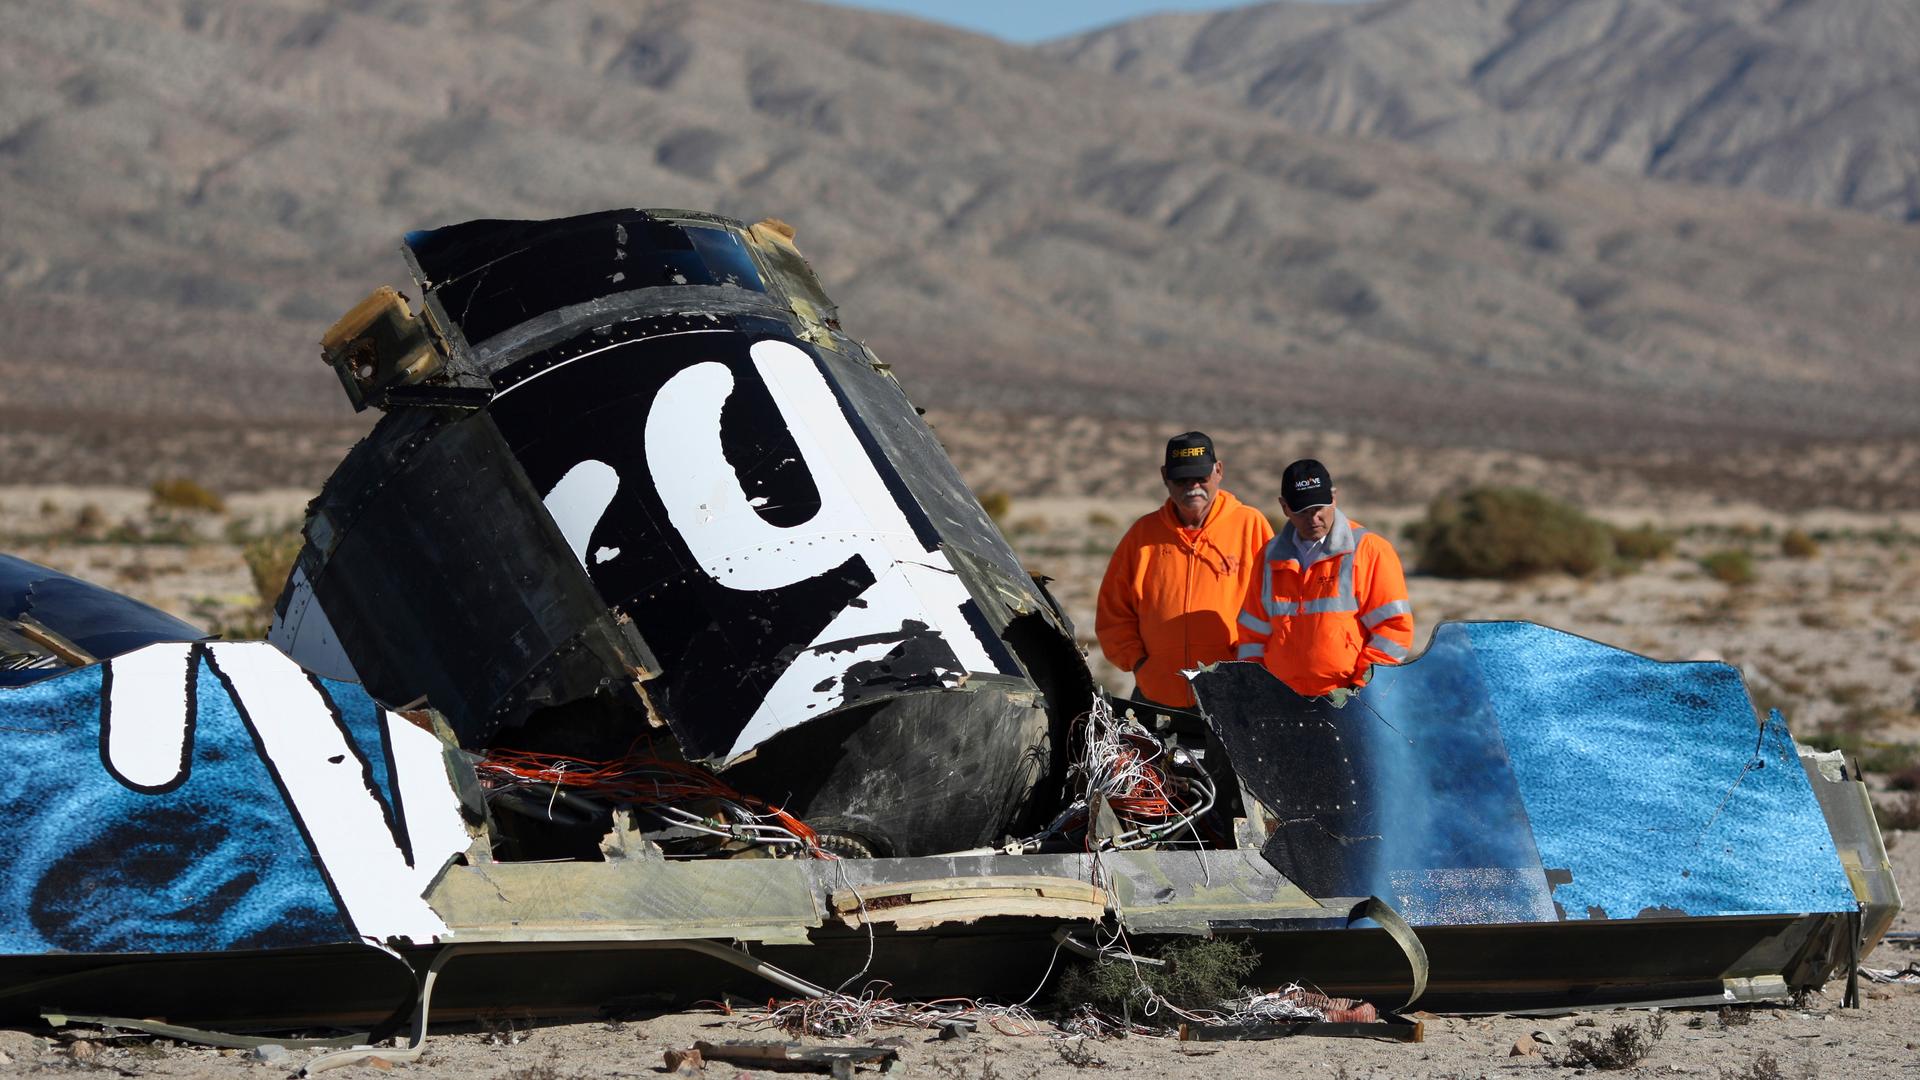 Sheriffs' deputies look at wreckage from the crash of Virgin Galactic's SpaceShipTwo near Cantil, California November 2, 2014. A suborbital passenger spaceship being developed by Richard Branson's Virgin Galactic company crashed during a test flight on Fr